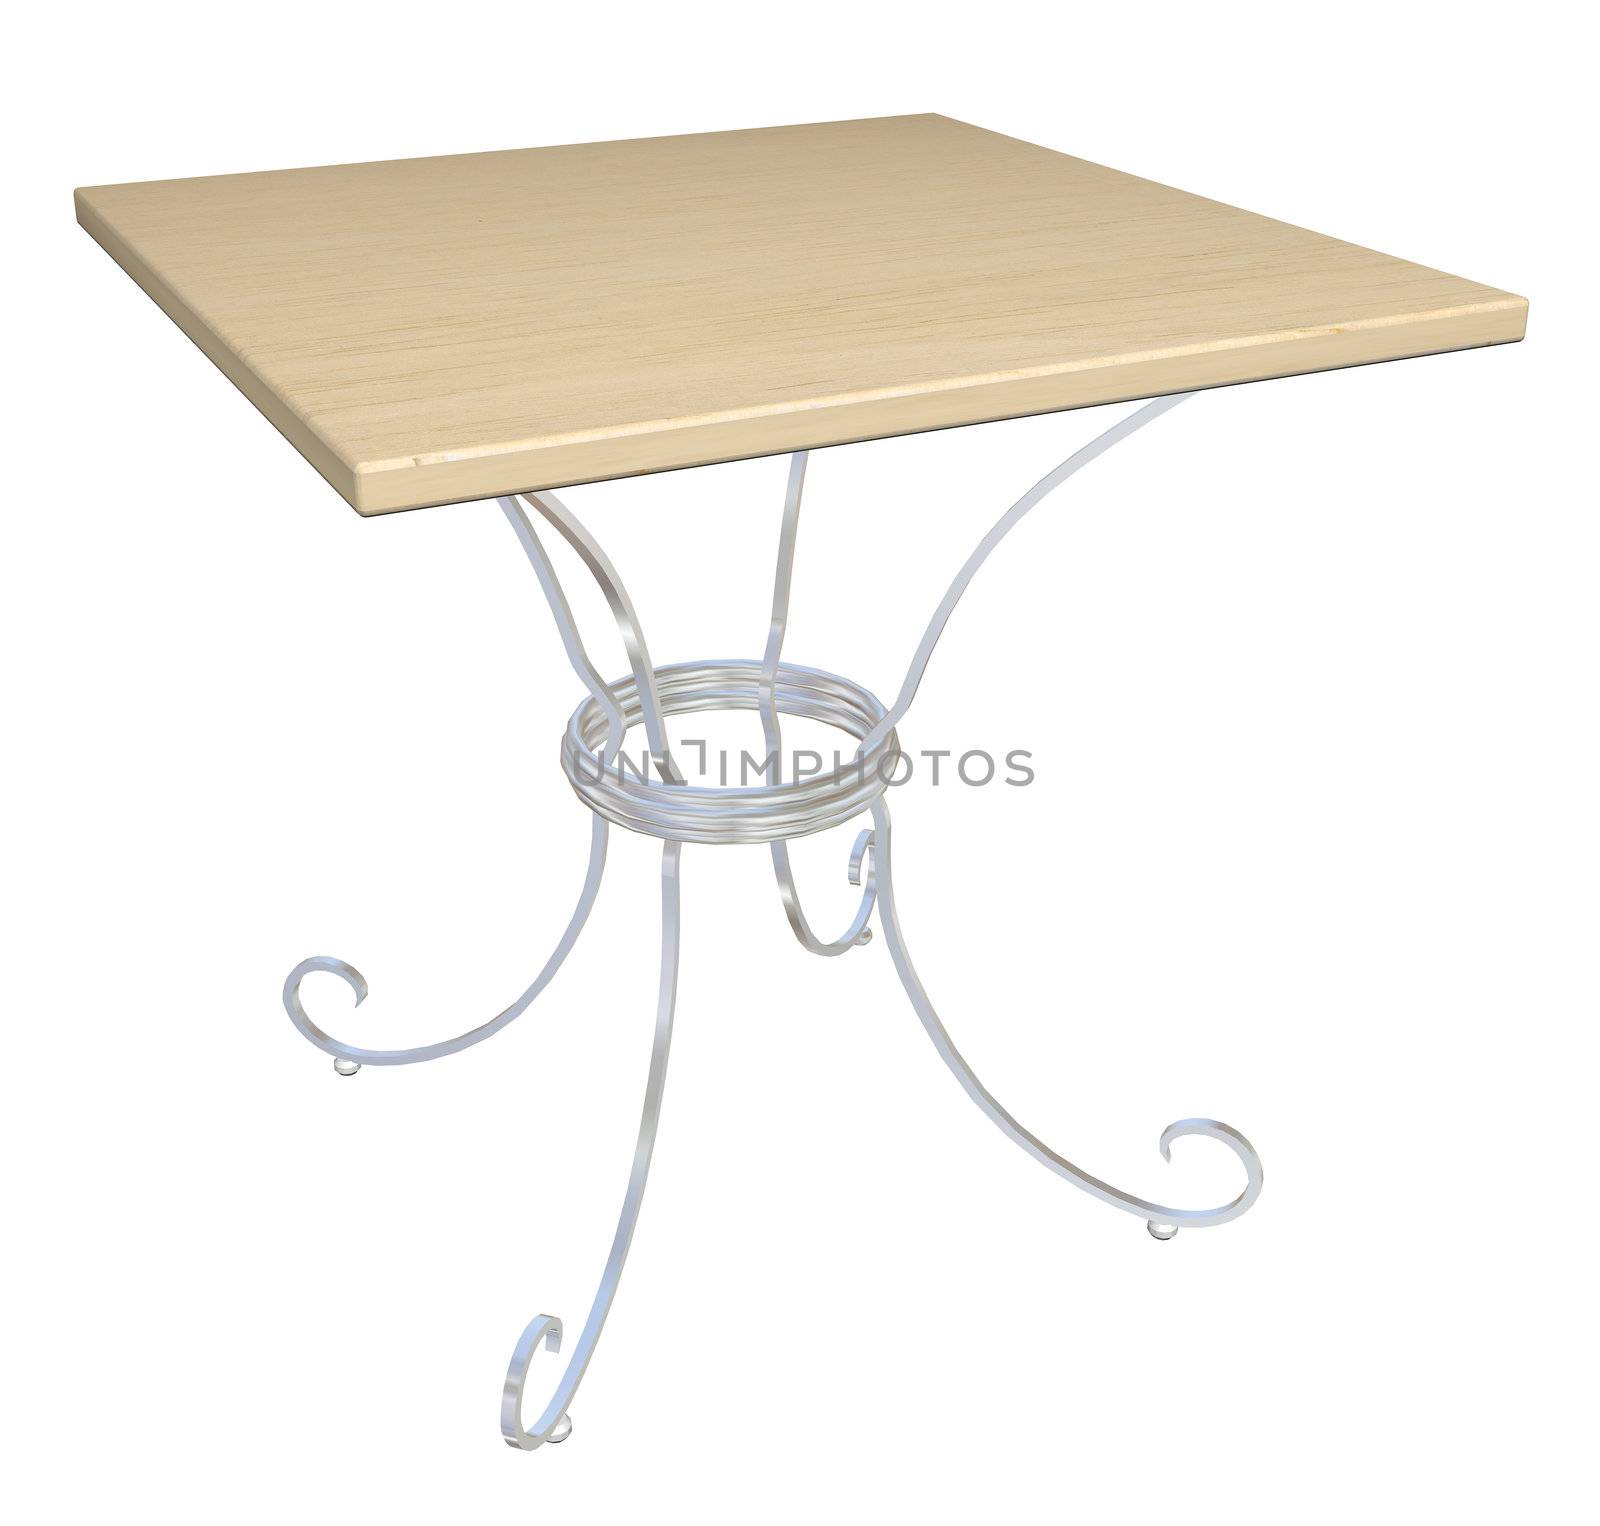 Square wooden cafe table, cast-iron base,  3D illustration, isolated against a white background.